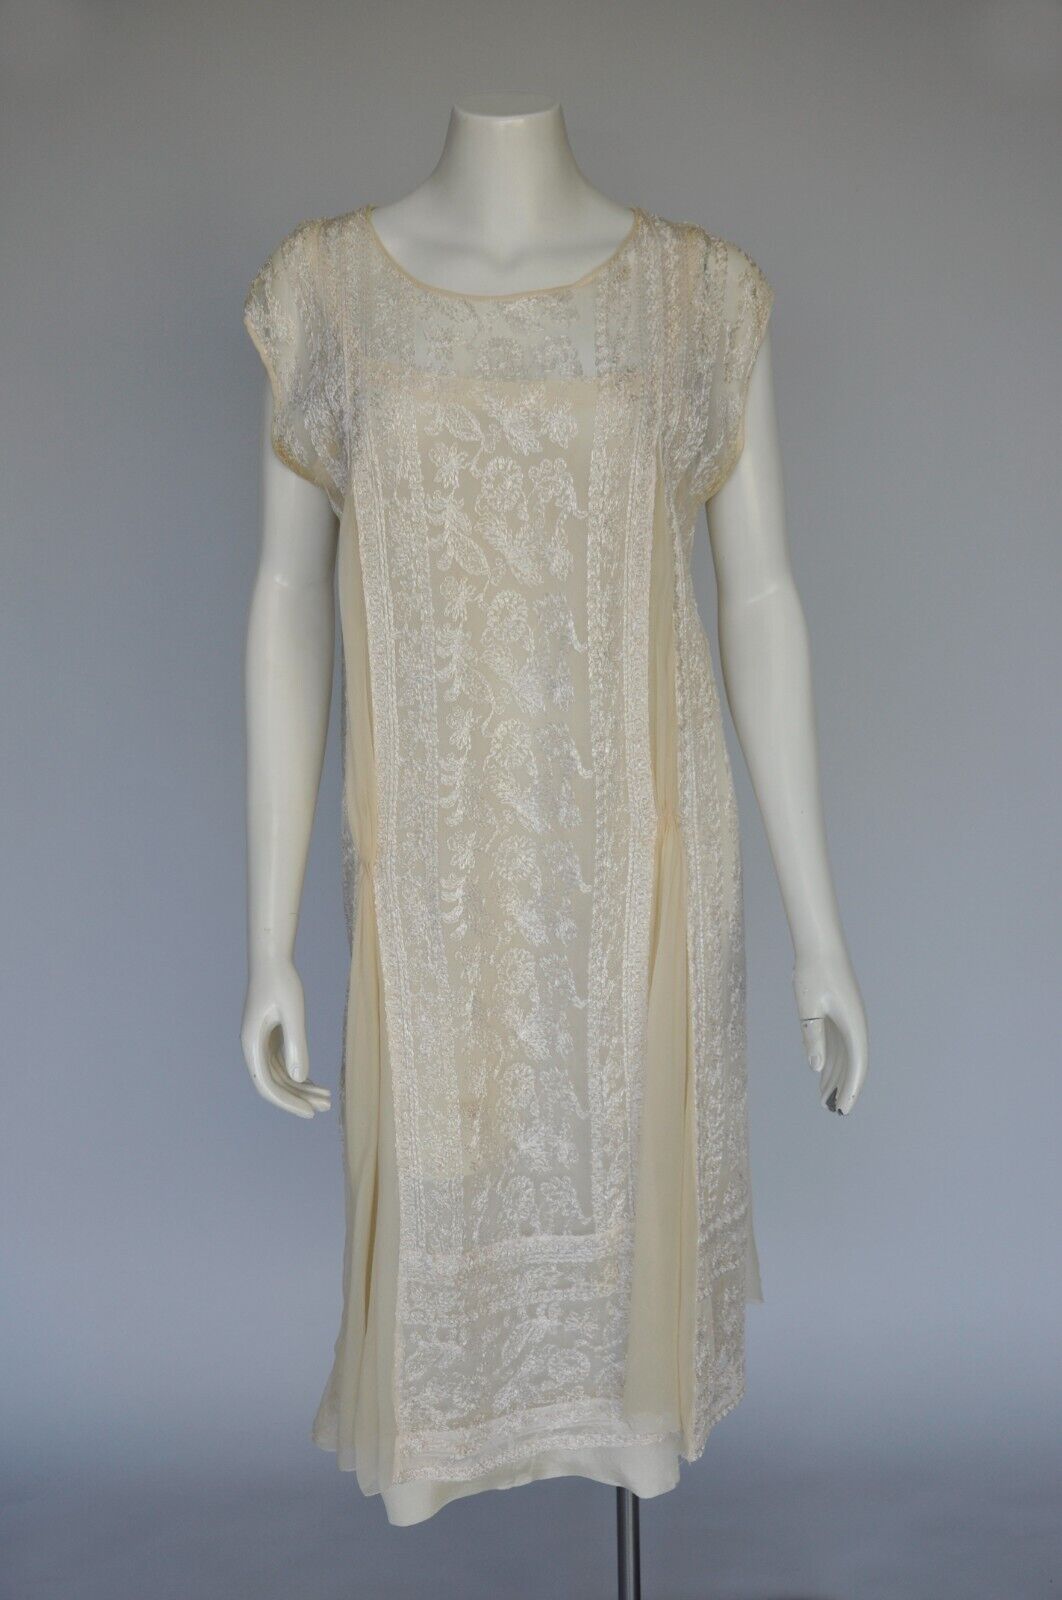 Antique 1920s Ivory Floral Net Embroidered Dress w/ Silk Chiffon Panels Wedding